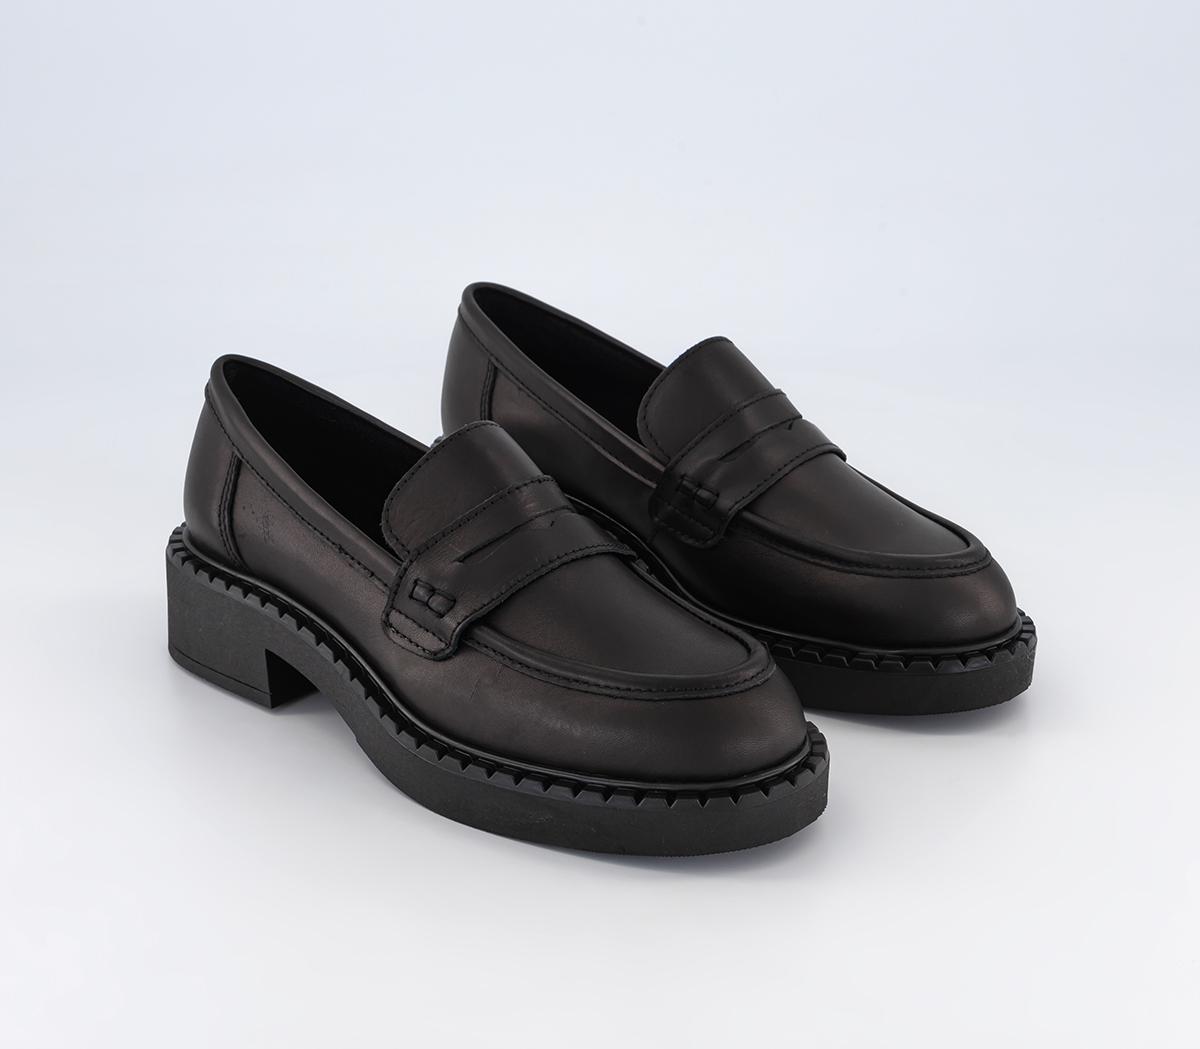 OFFICE Wide Fit Favour Chunky Loafers Black Leather - Women’s Loafers